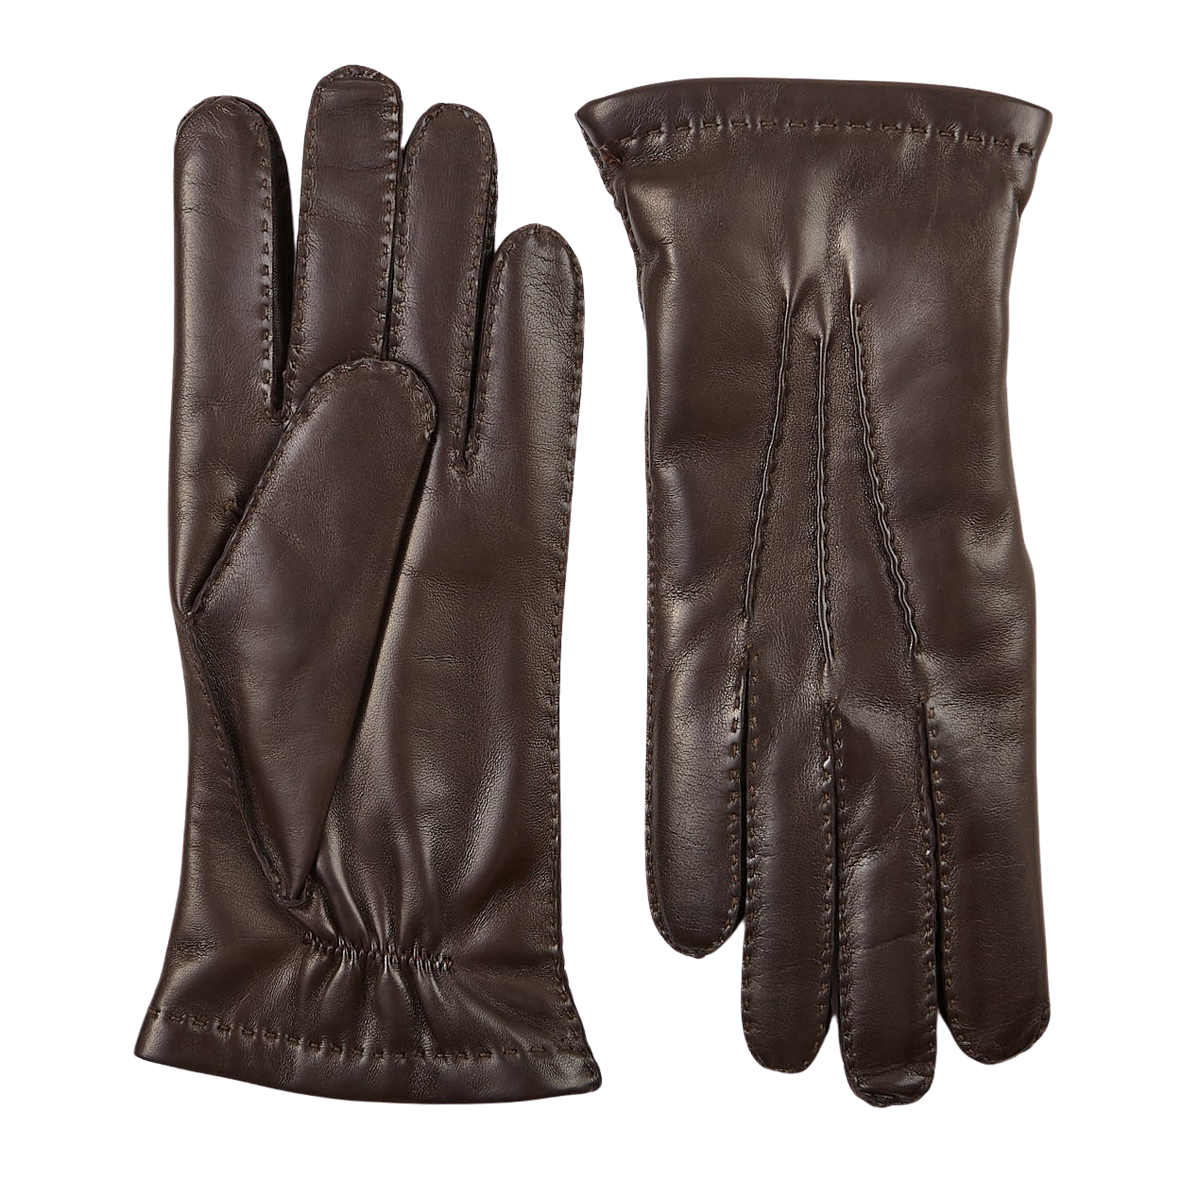 Hestra Espresso Hairsheep Cashmere Lined Gloves